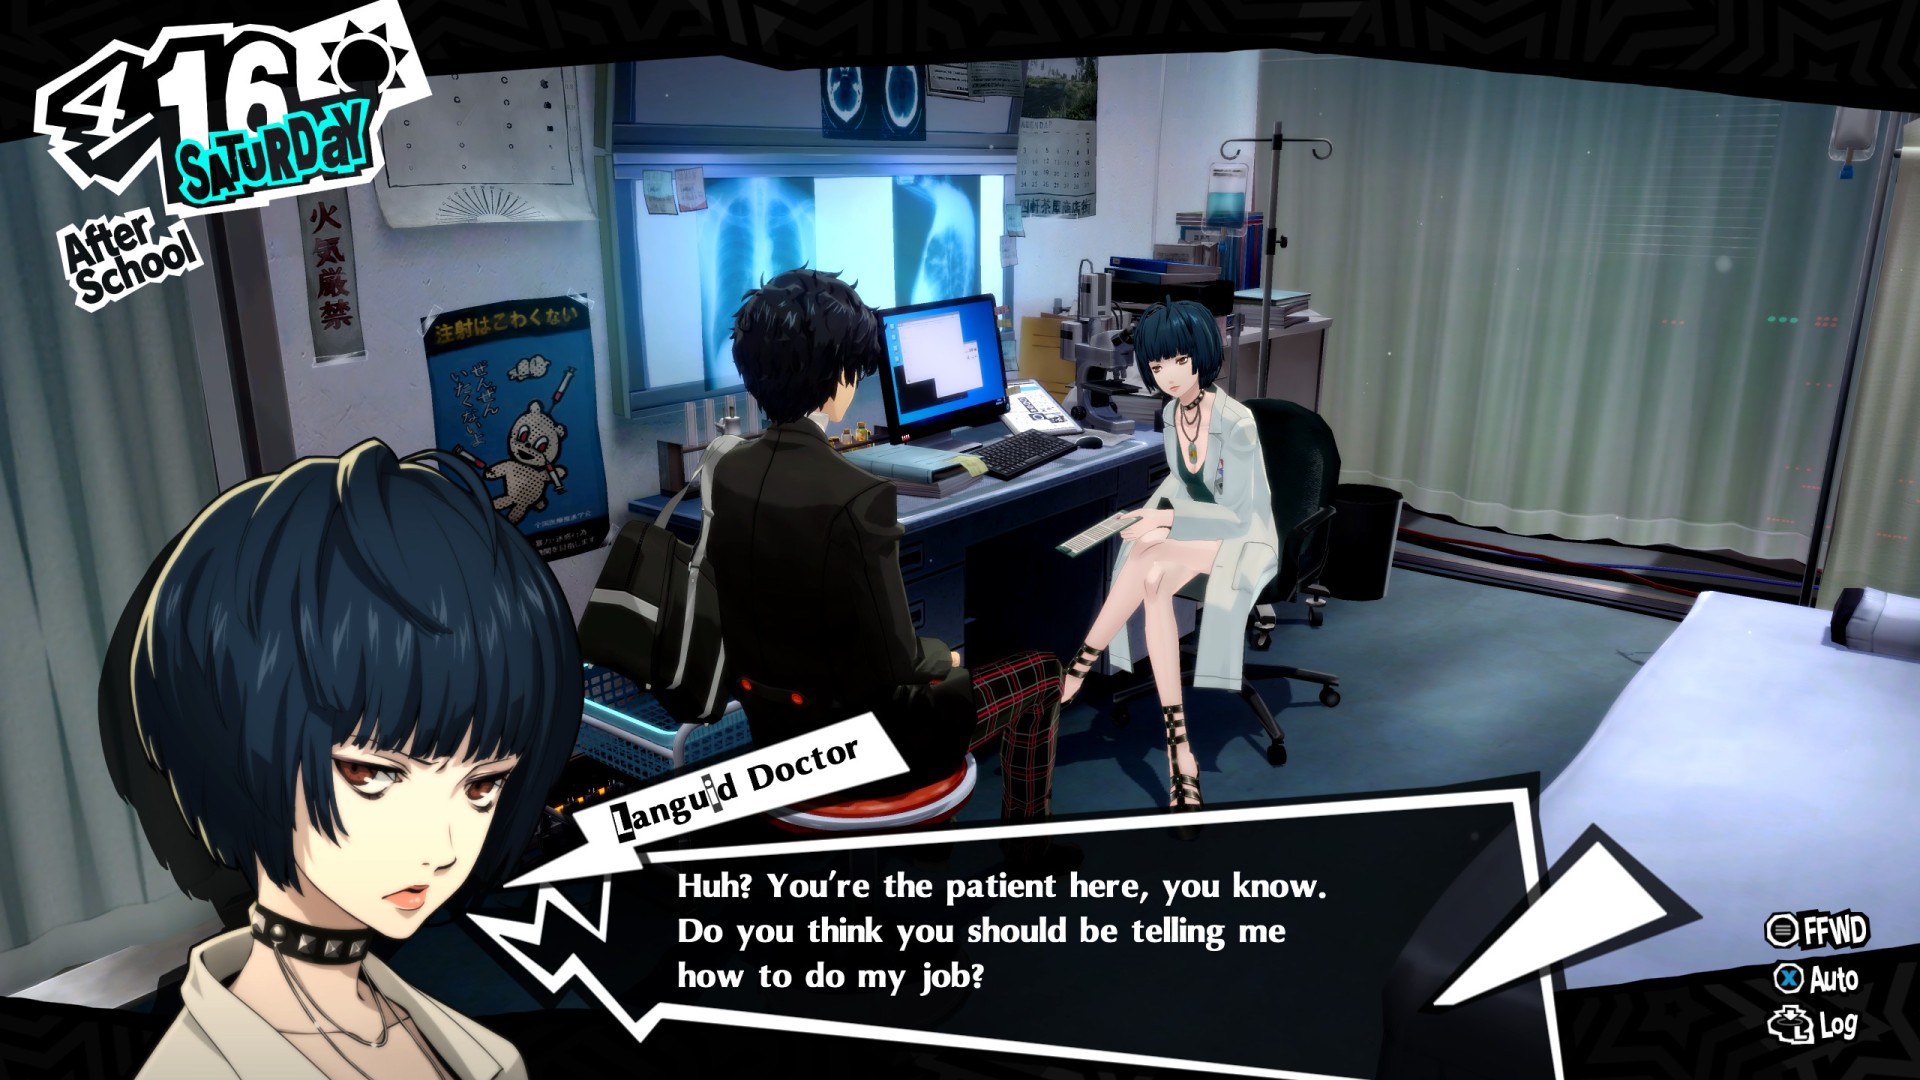 Persona 5 Royal (for PC) Review